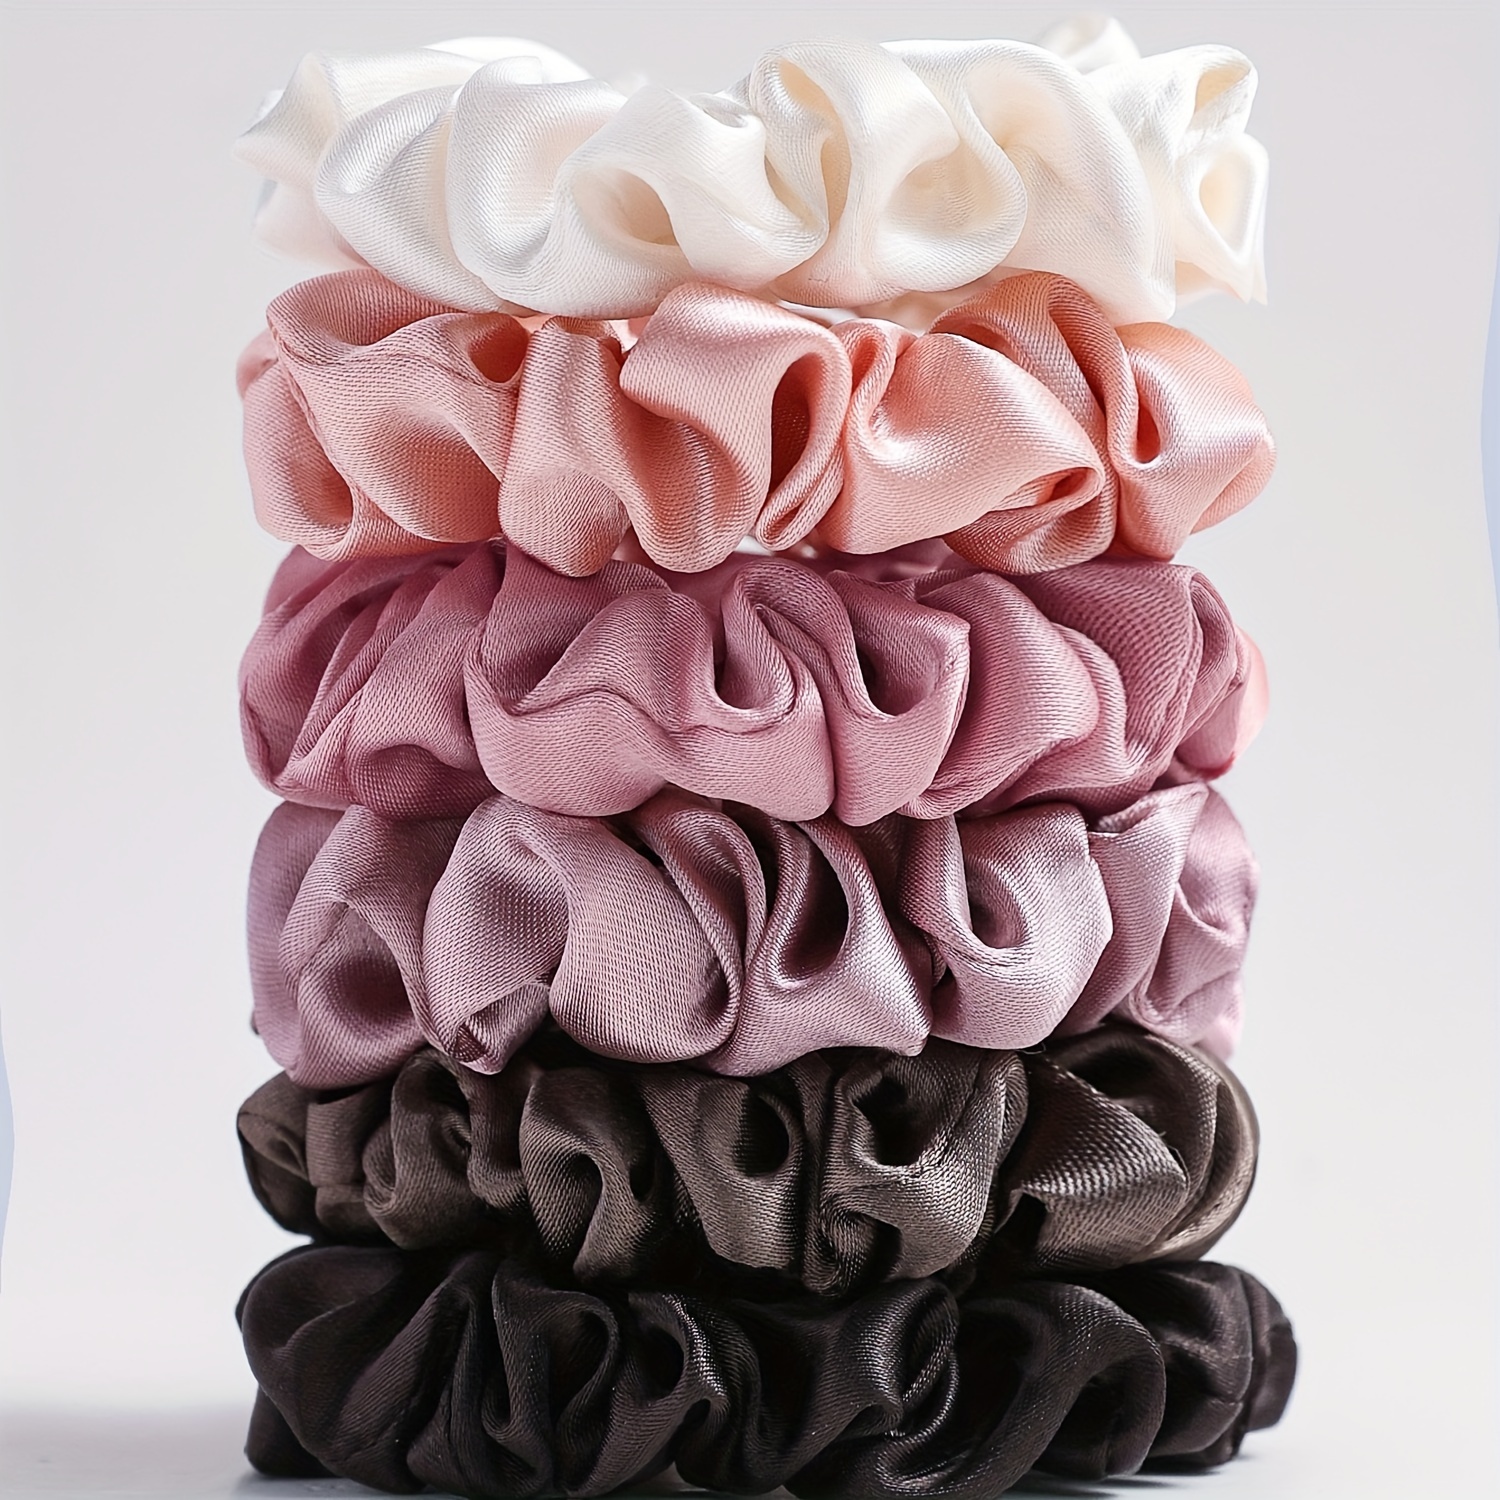 

6 Pcs Solid Color Satin Scrunchies Set - Soft And Comfortable Hair Ties For Ponytail And Hair Accessories